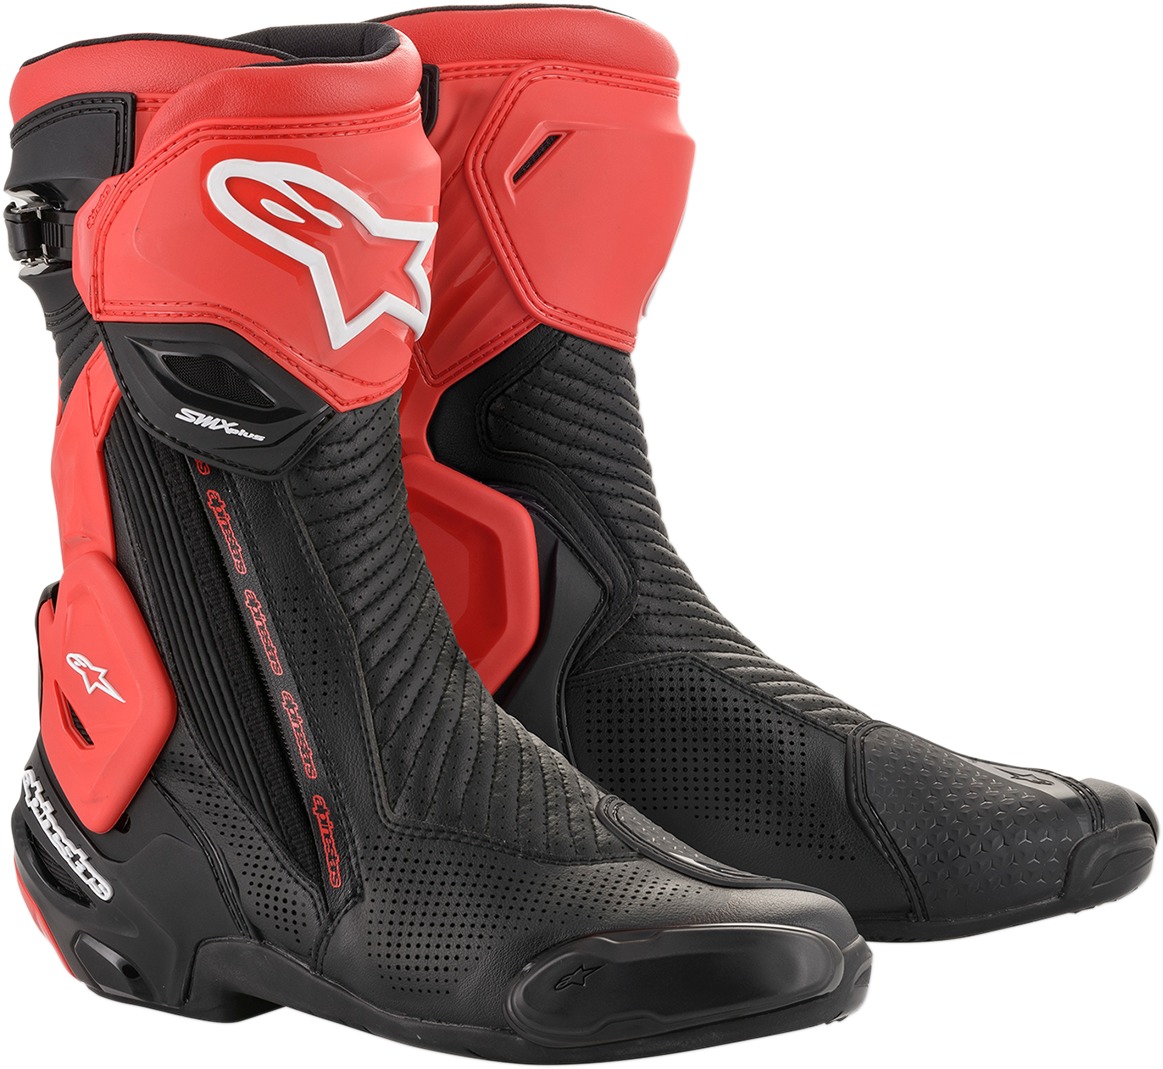 SMX Plus Street Riding Boots Black/Red US 9.5 - Click Image to Close